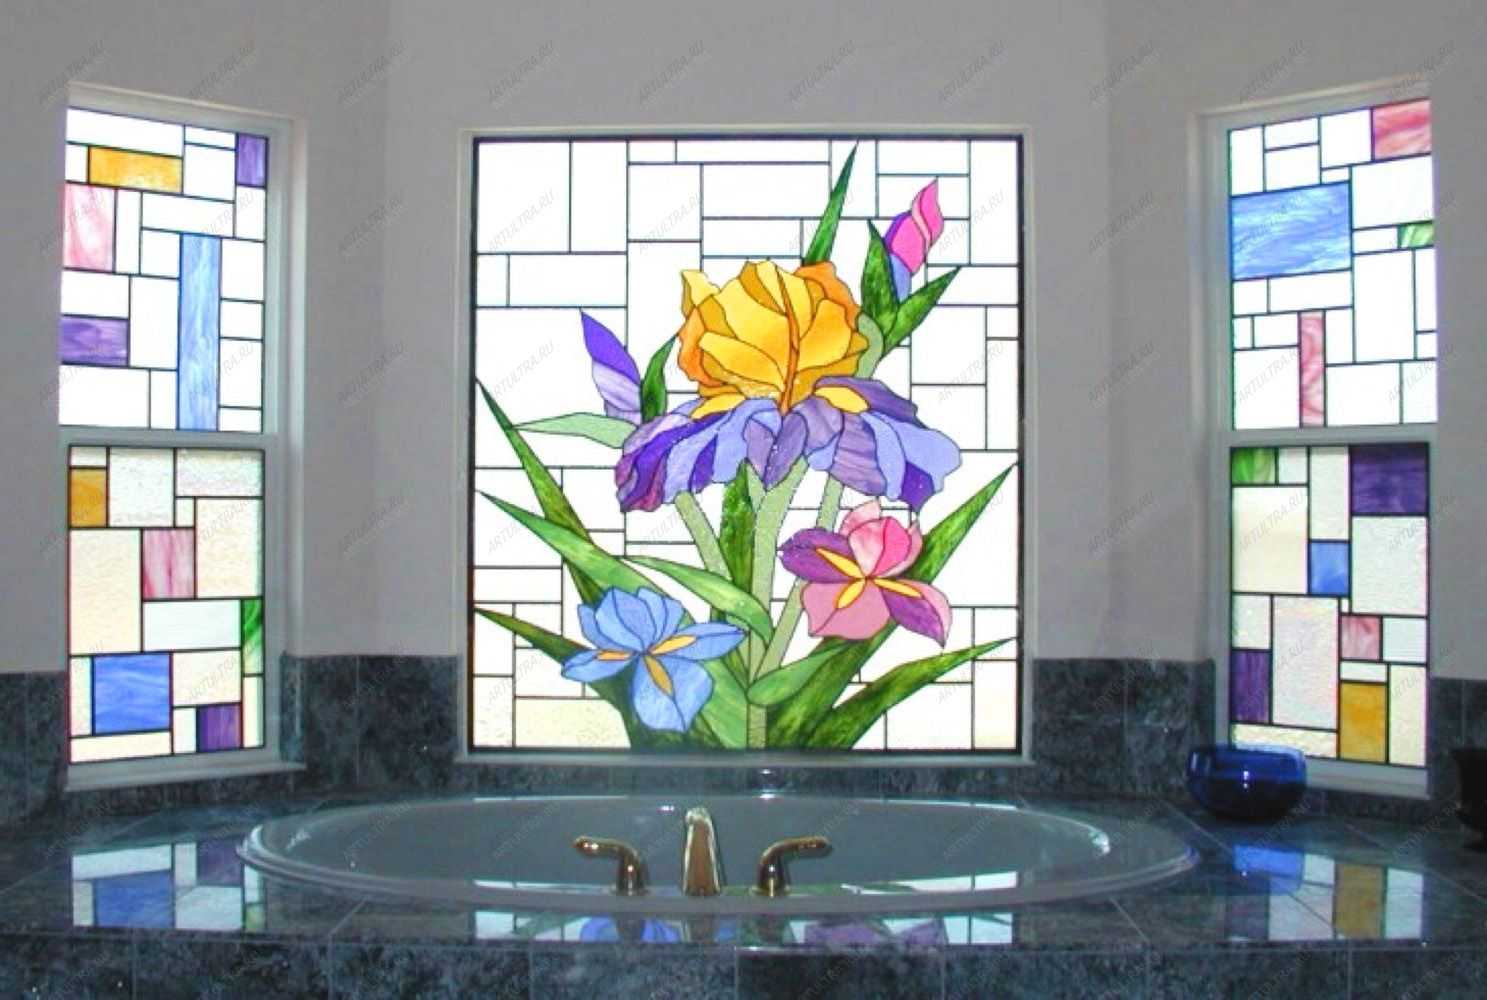 sandblasted stained glass window in the living room decor